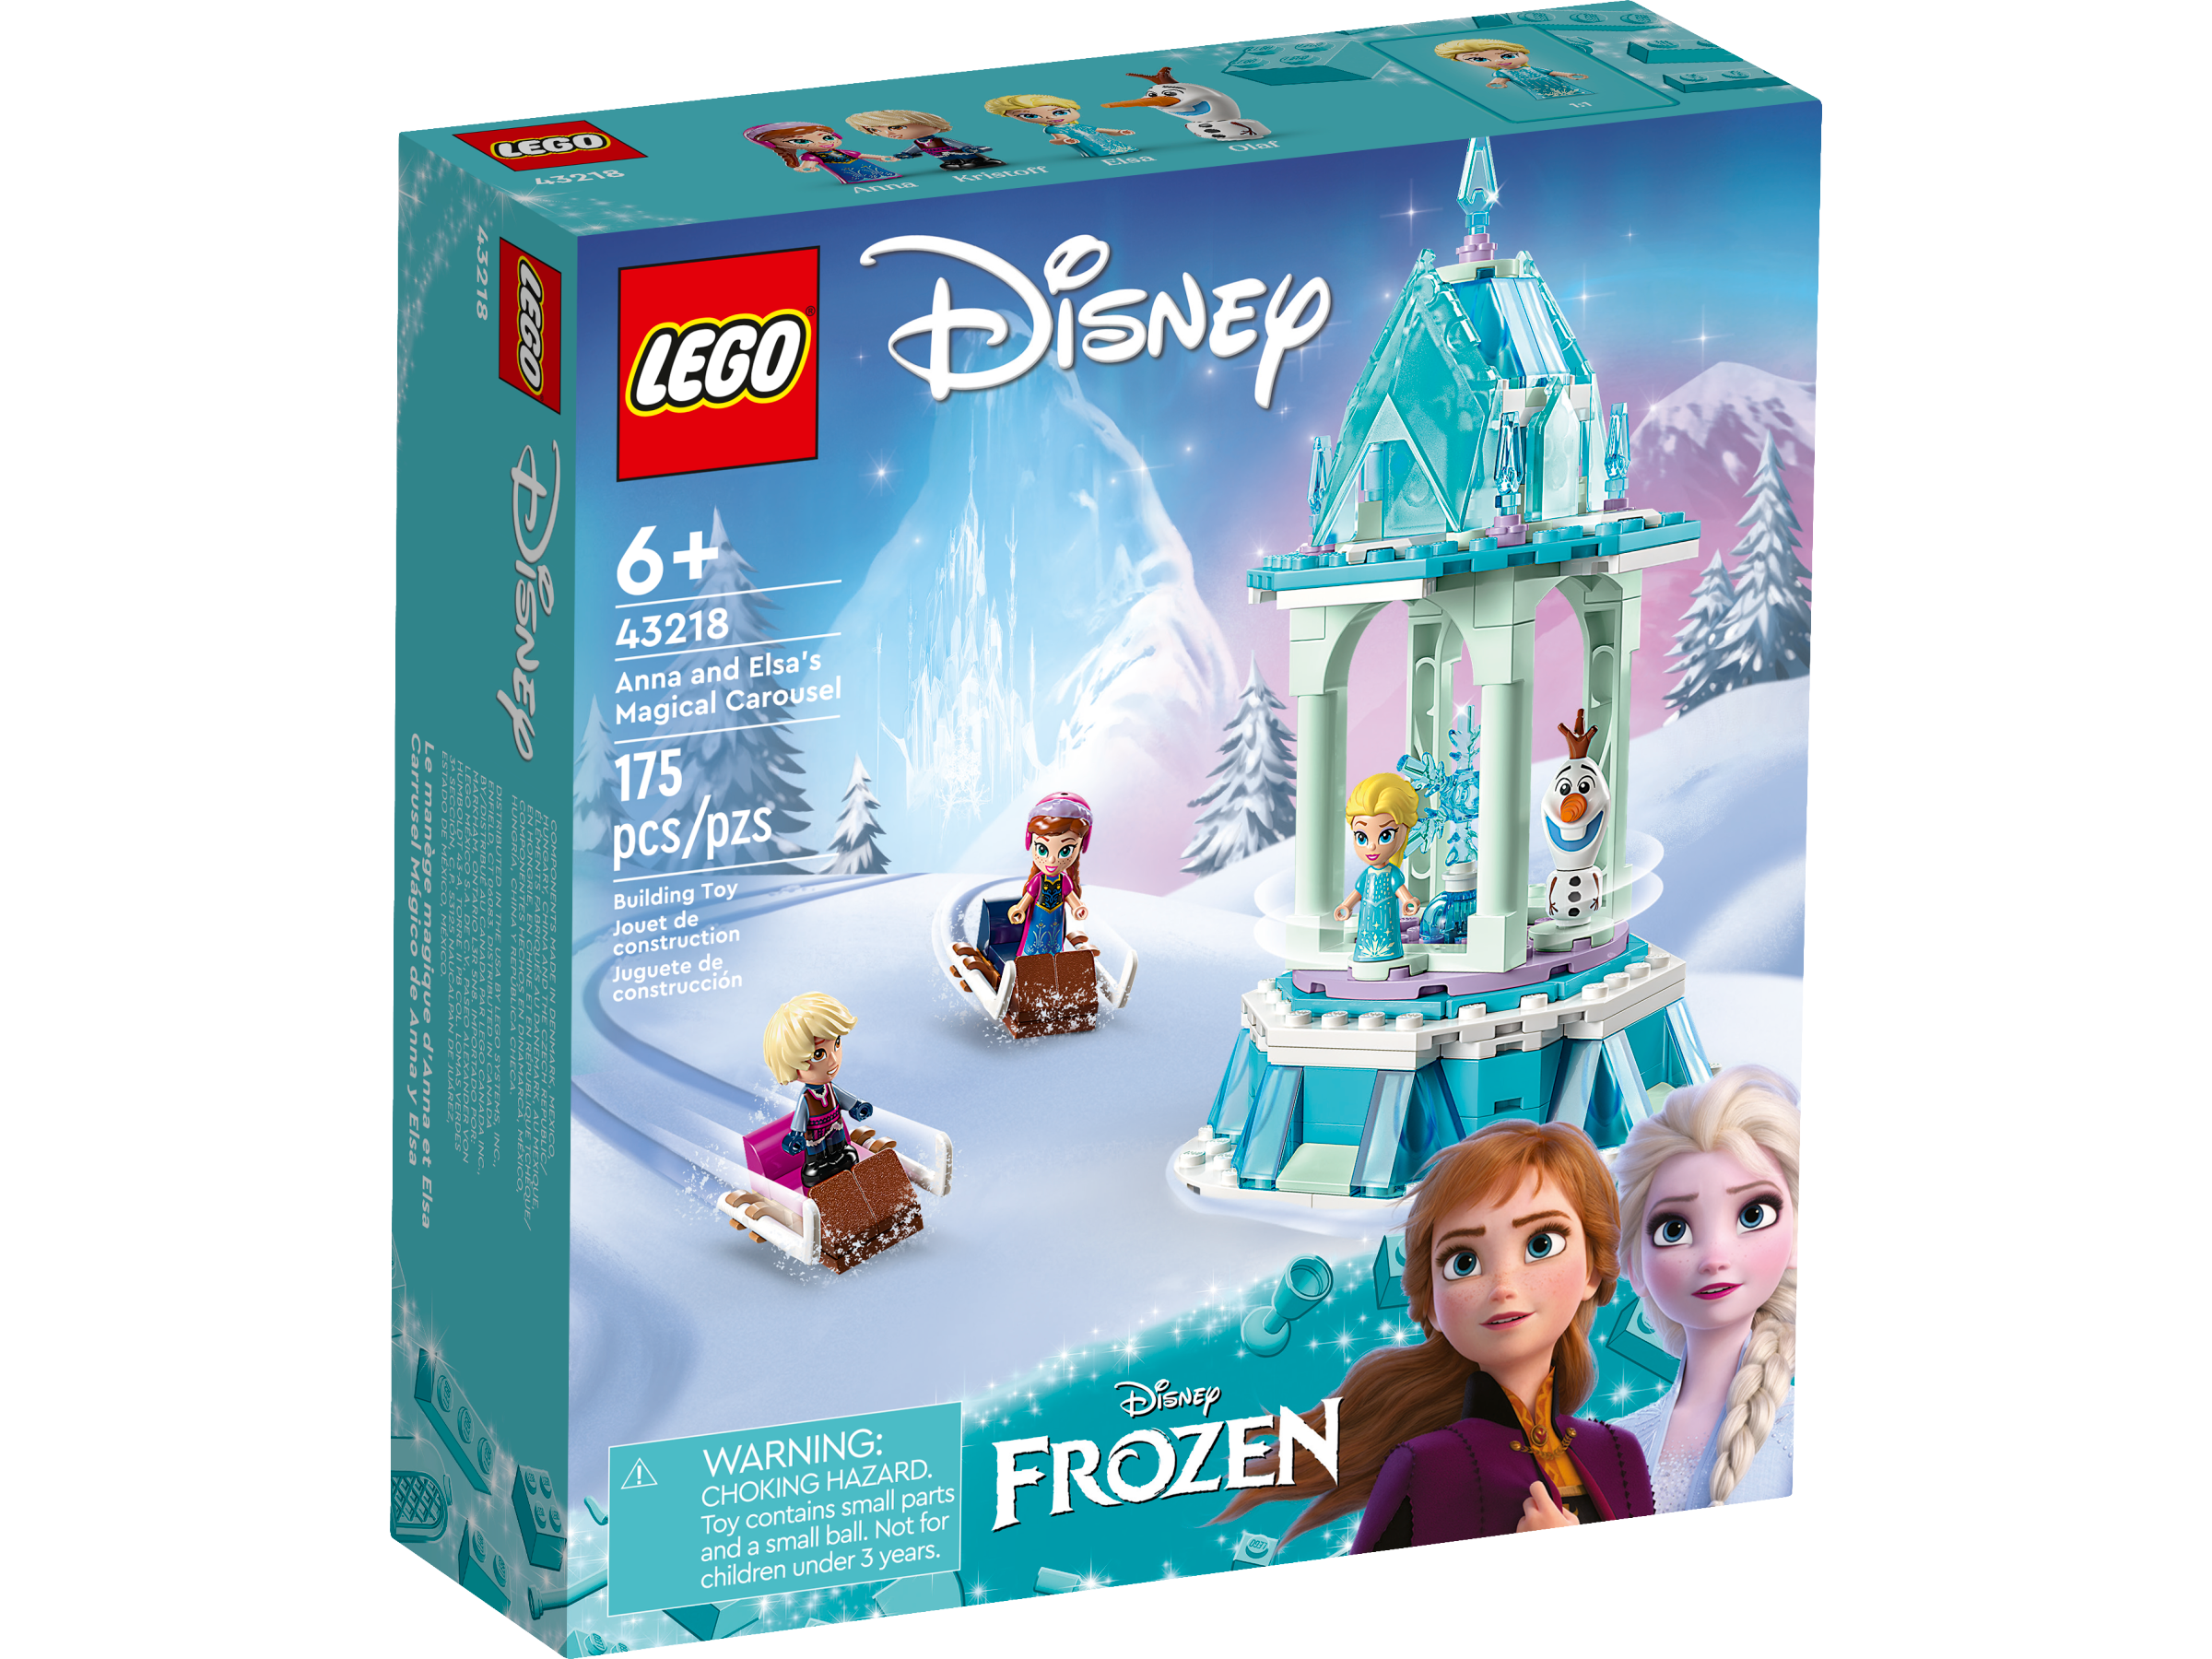 Get Trend - 💎 Disney Frozen Gifts Set For Children with Elsa, Anna, Olaf,  and Sven, 4 Collectable Play Action Figure Set 💎 By Disney 🔥 Disney Frozen  Elsa Anna Olaf Sven